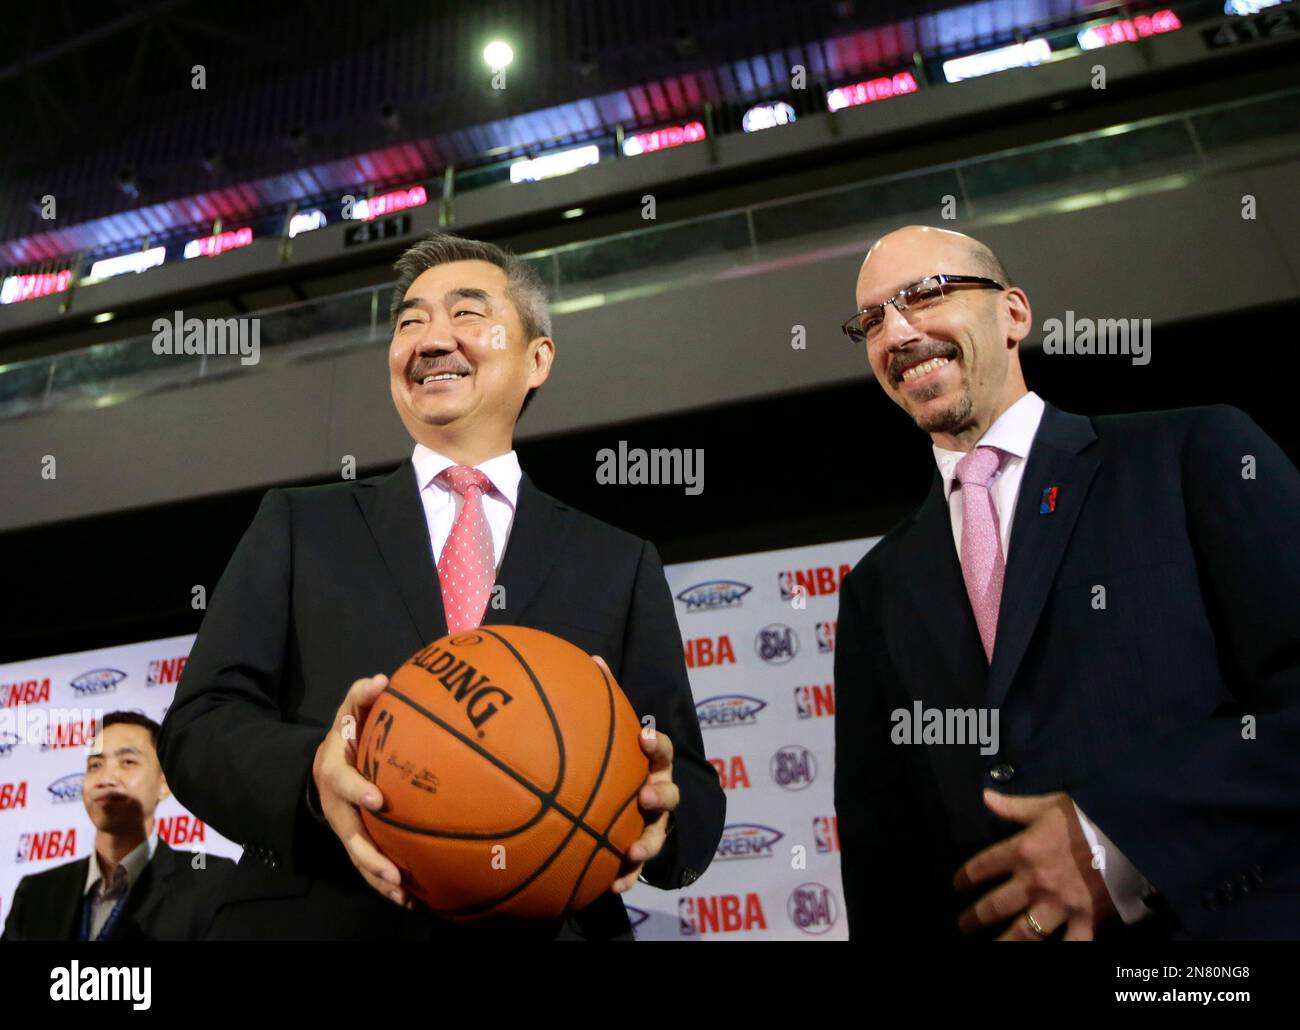 LOOK: Largest NBA Store in PH opens at Mall of Asia